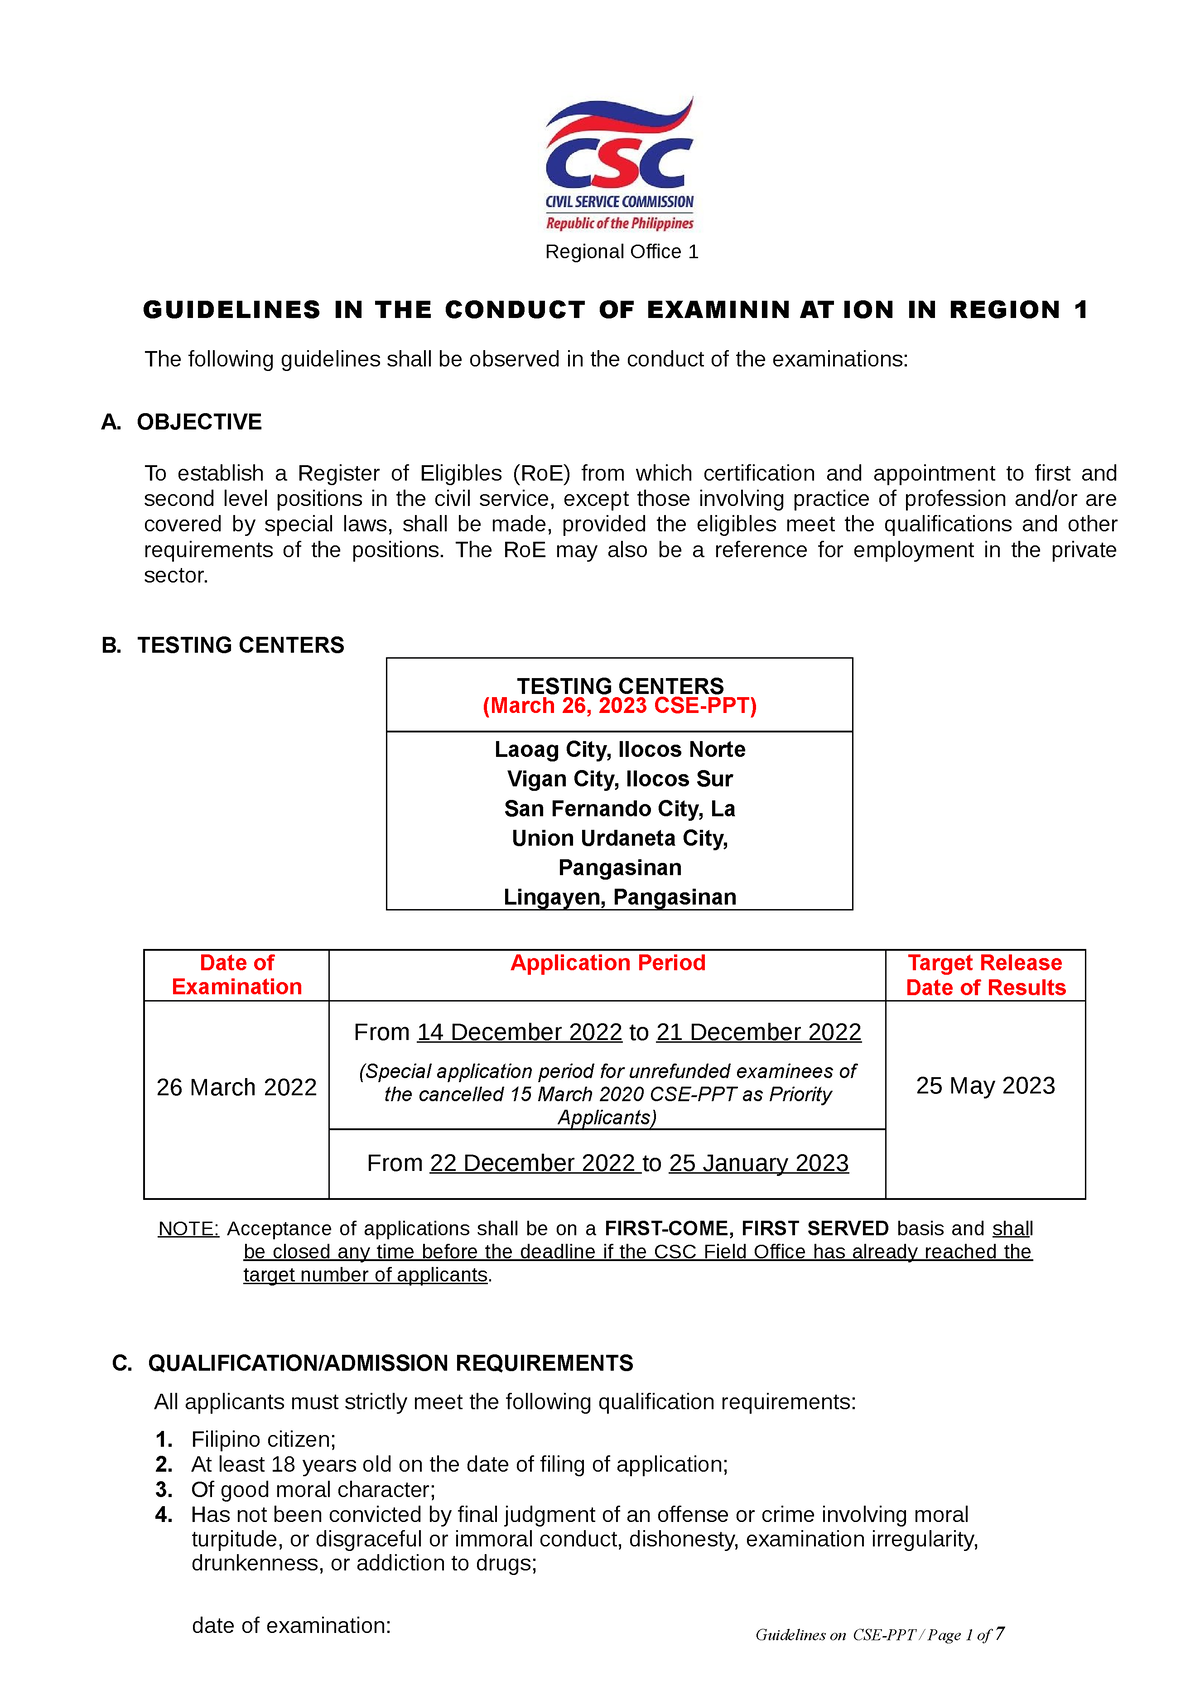 school assignment csc march 26 2023 ncr